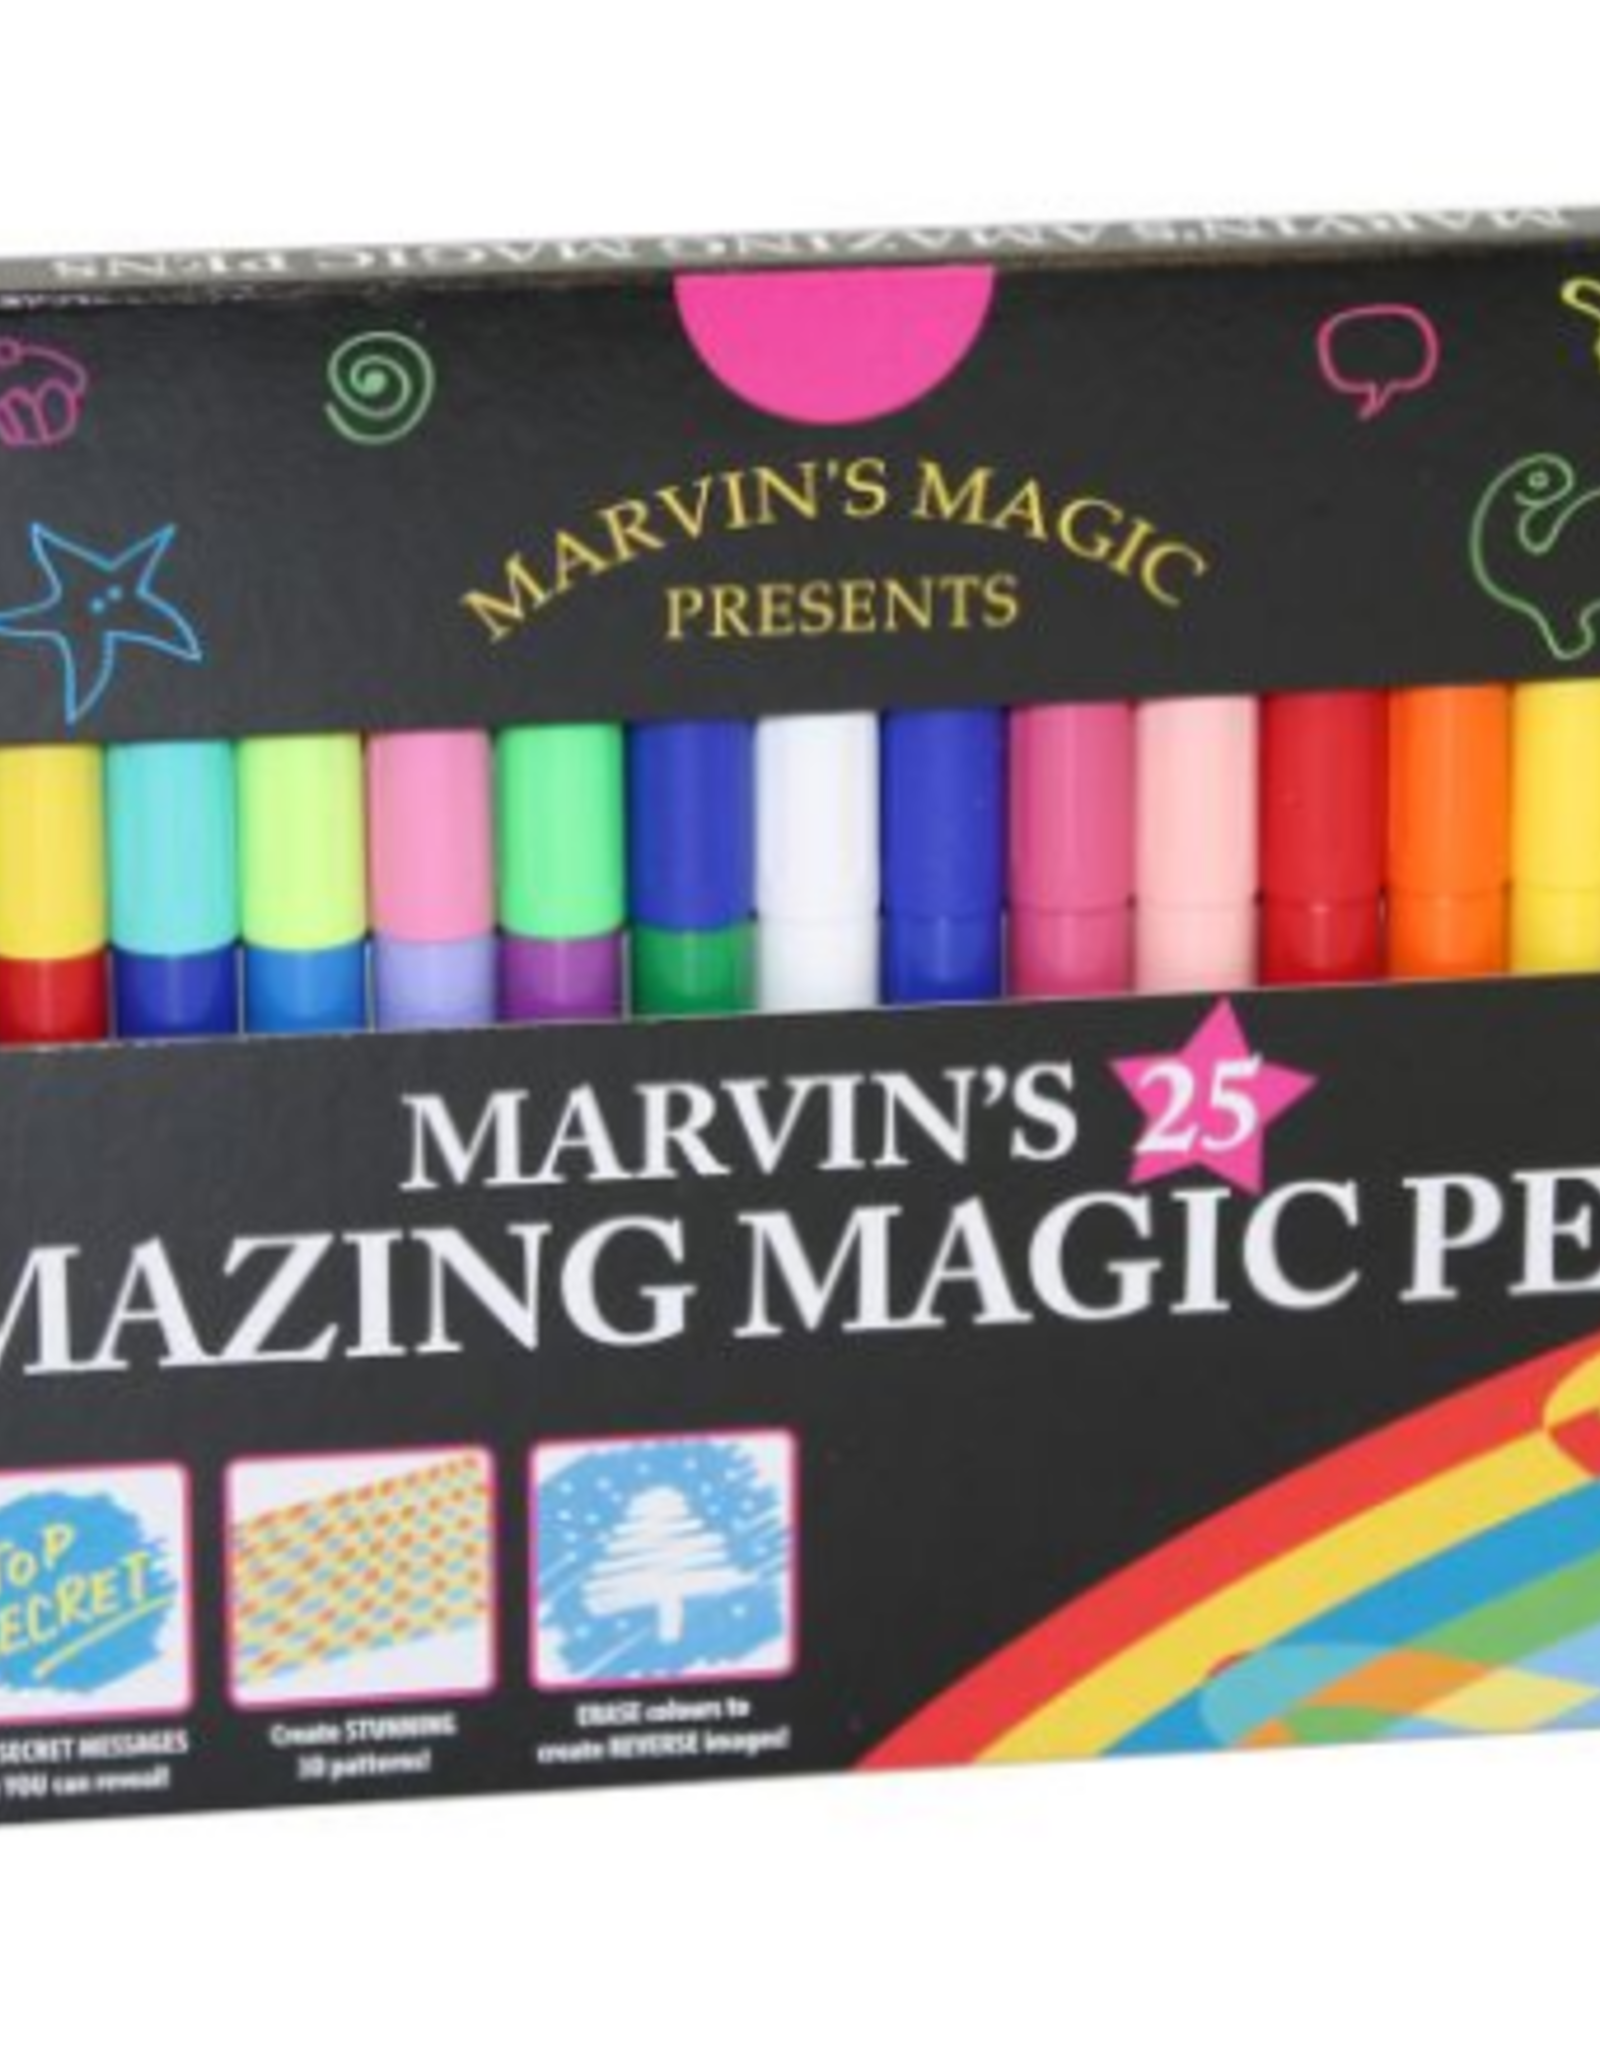 Marvin's Amazing Magic Pens 20 pc - Circle of Knowledge